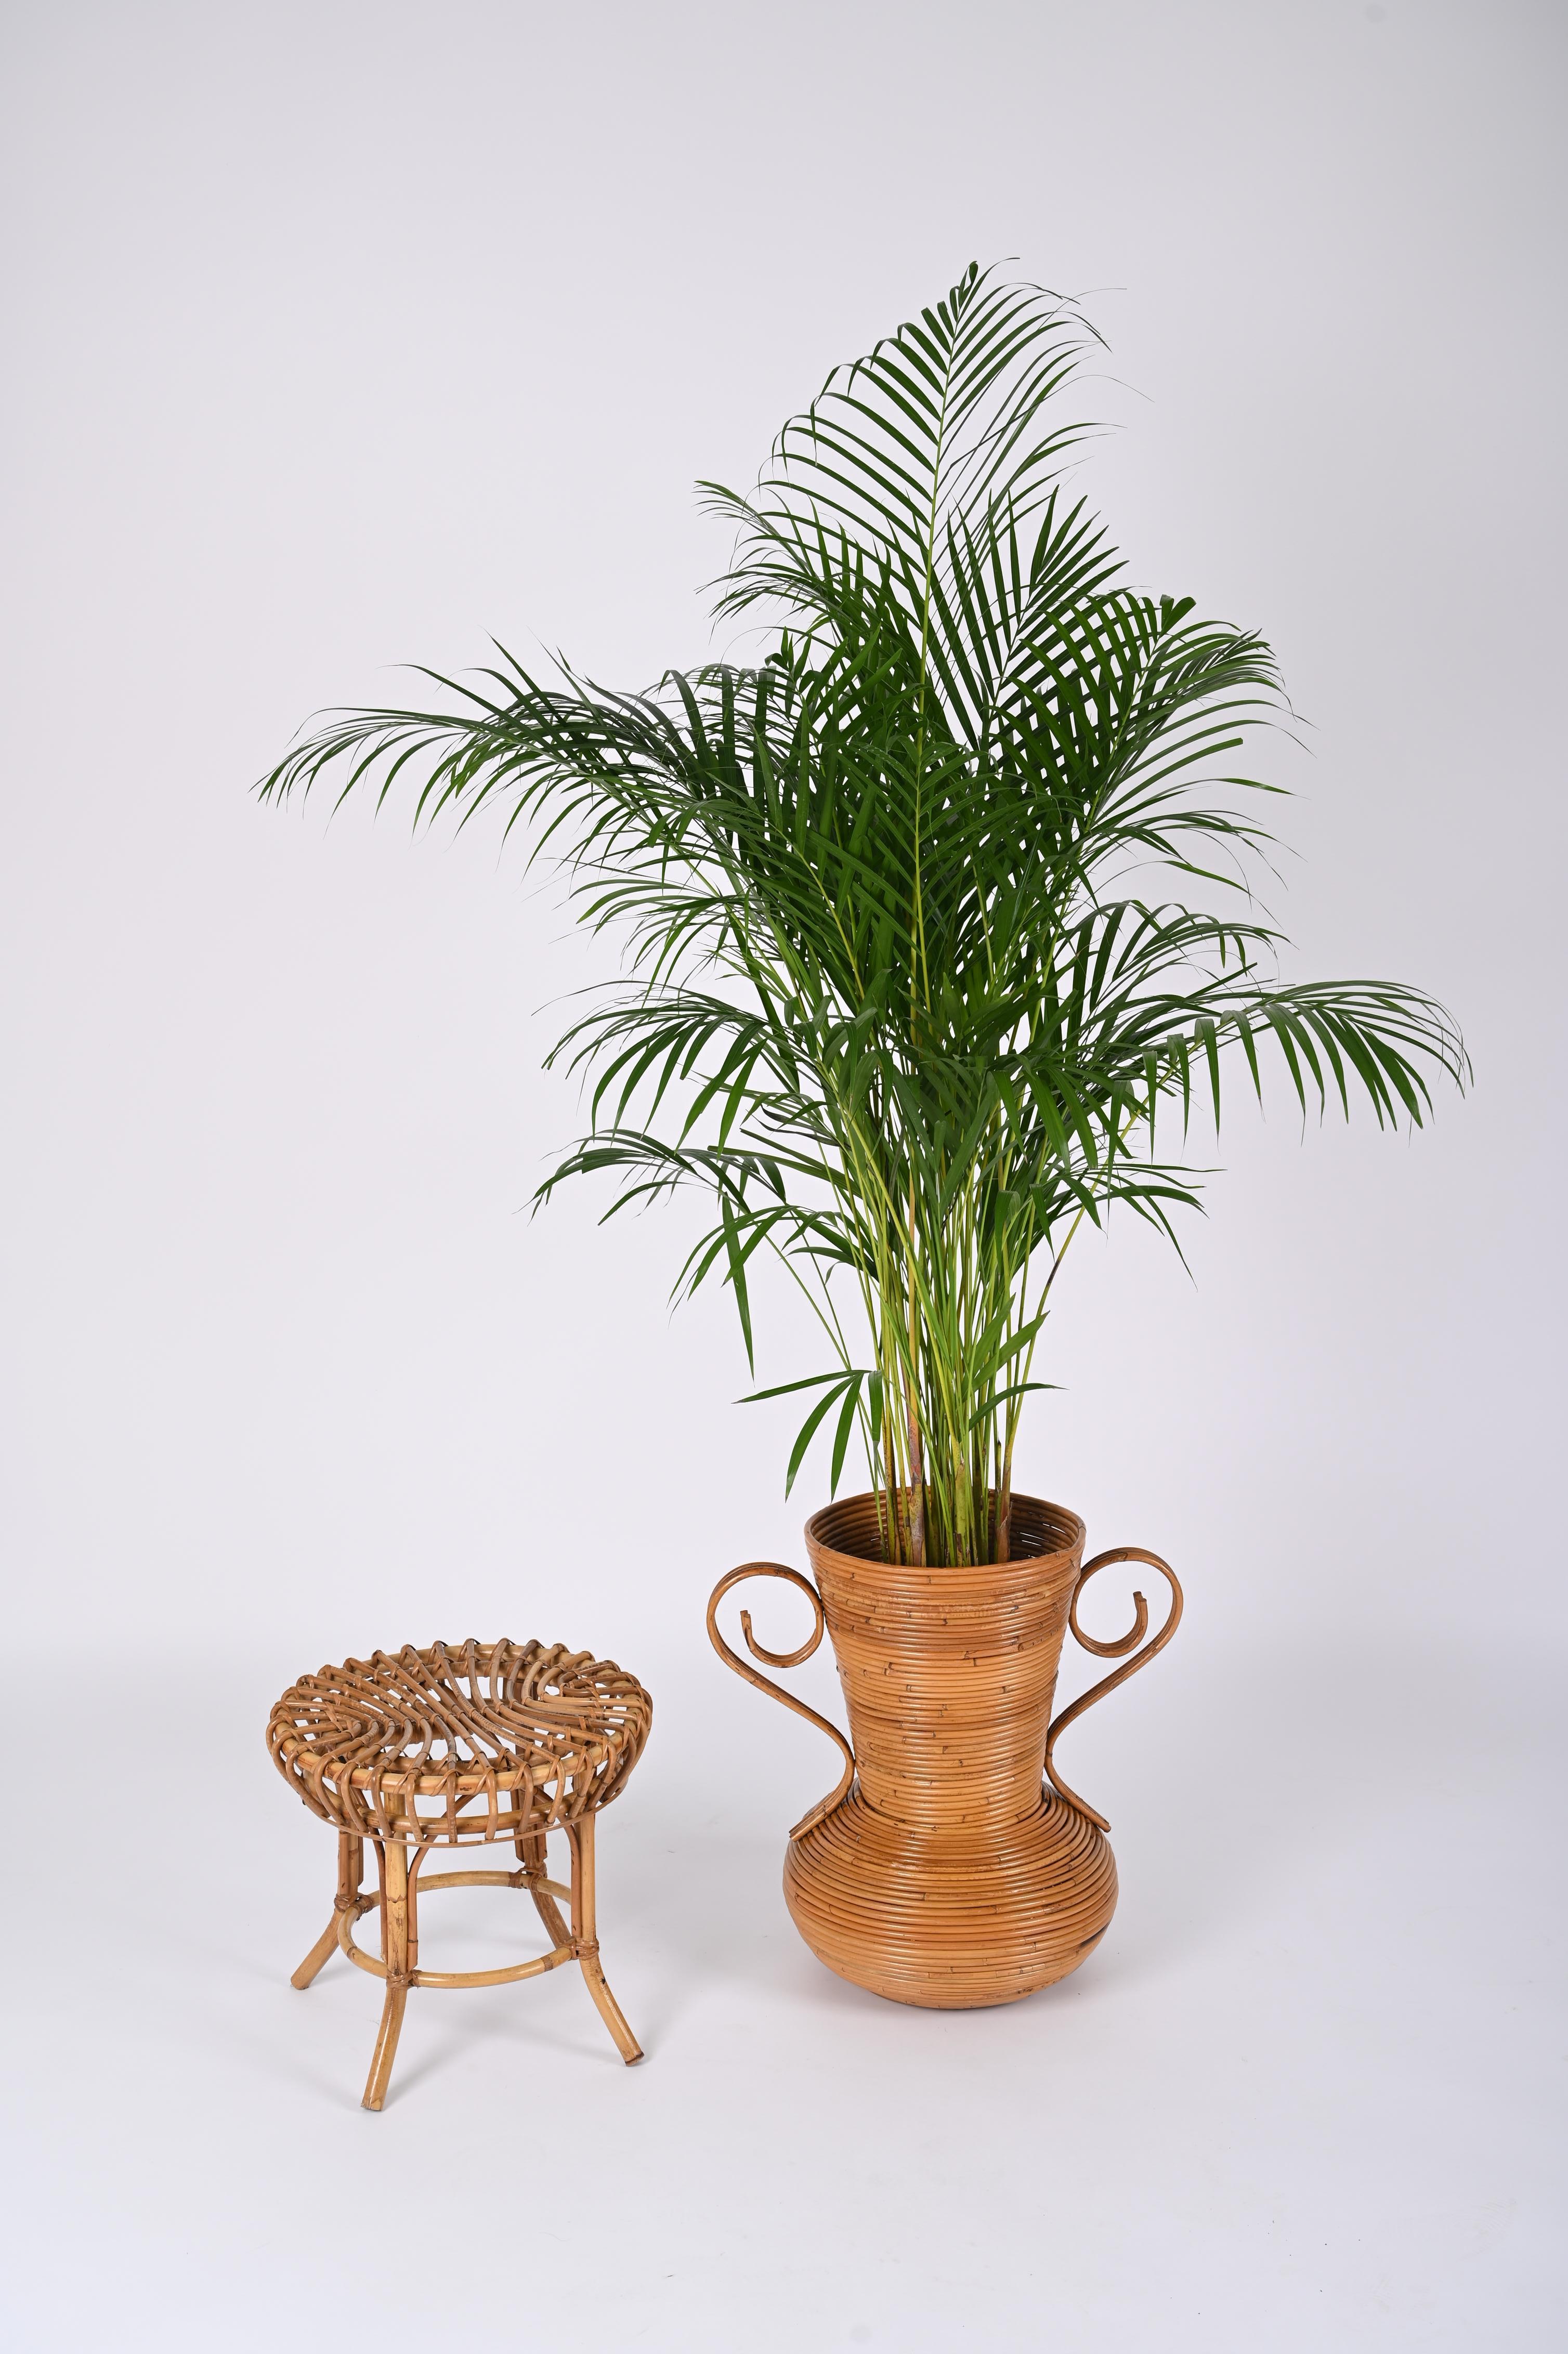 Midcentury Bamboo and Rattan Decorative Vase, by Vivai del Sud, Italy, 1970s For Sale 1